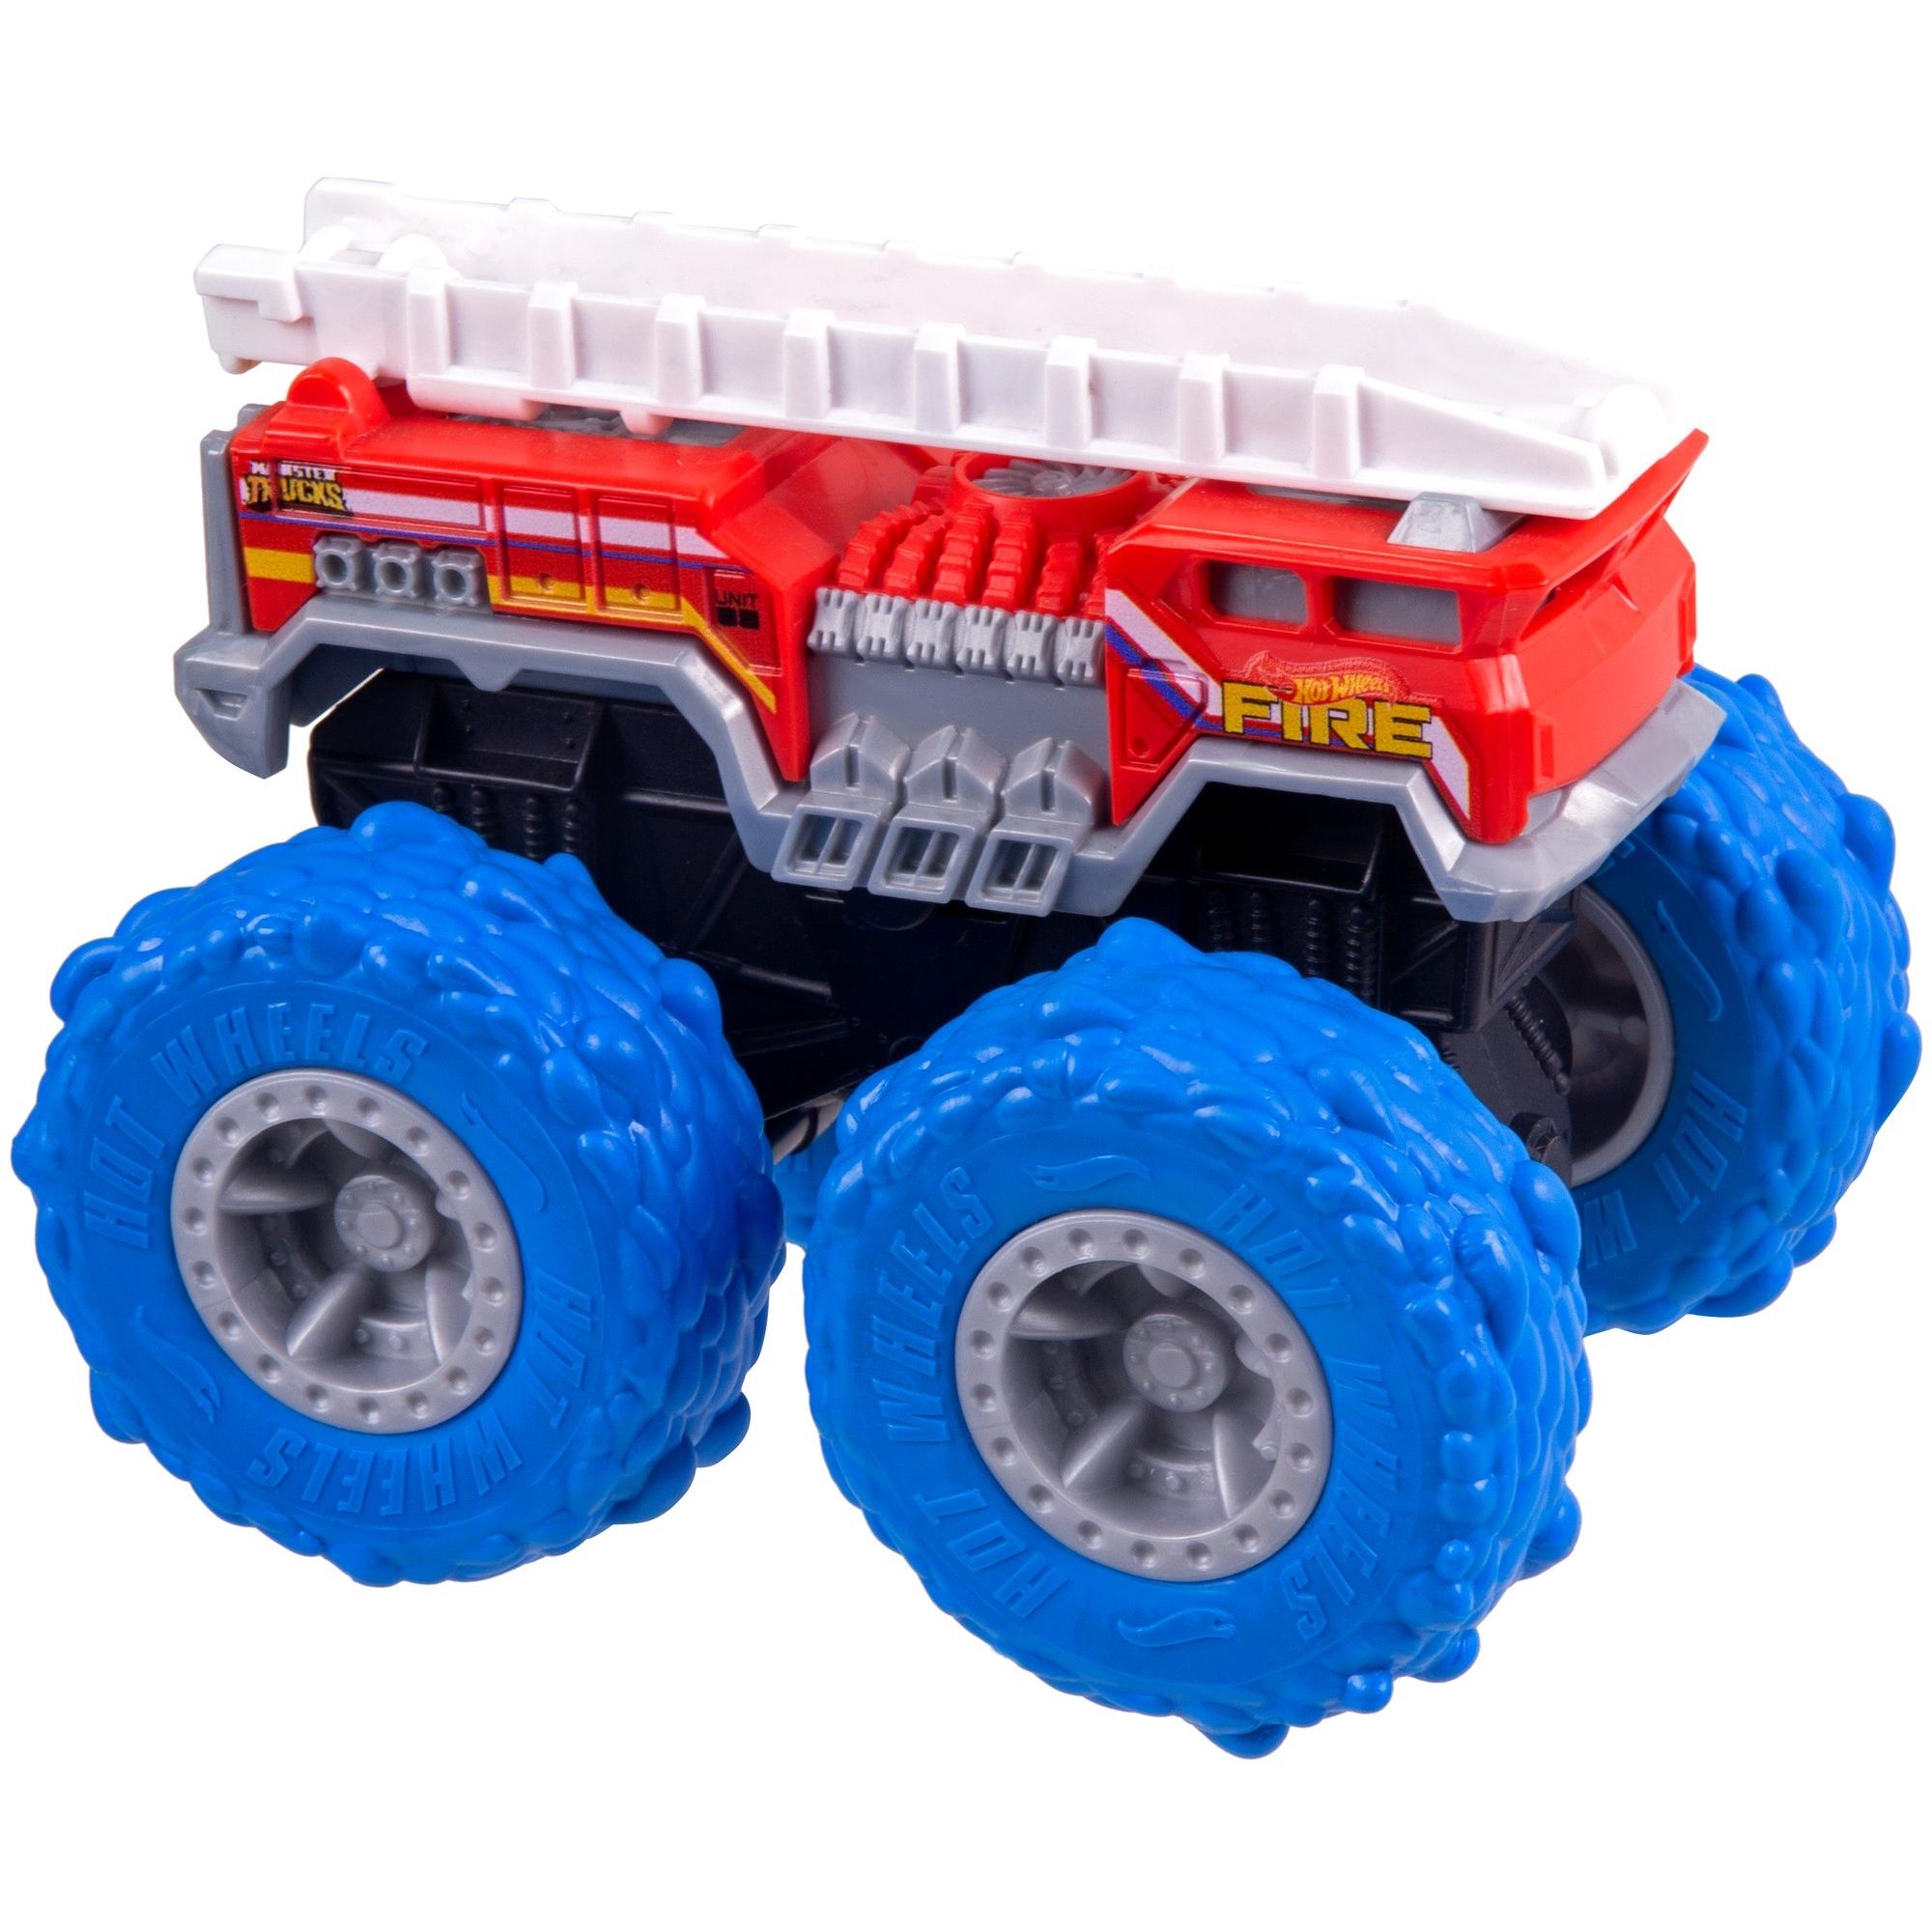 Monster Trucks By Hot Wheels 1:43 Scale Vehicle (Styles May Vary) - image 5 of 9